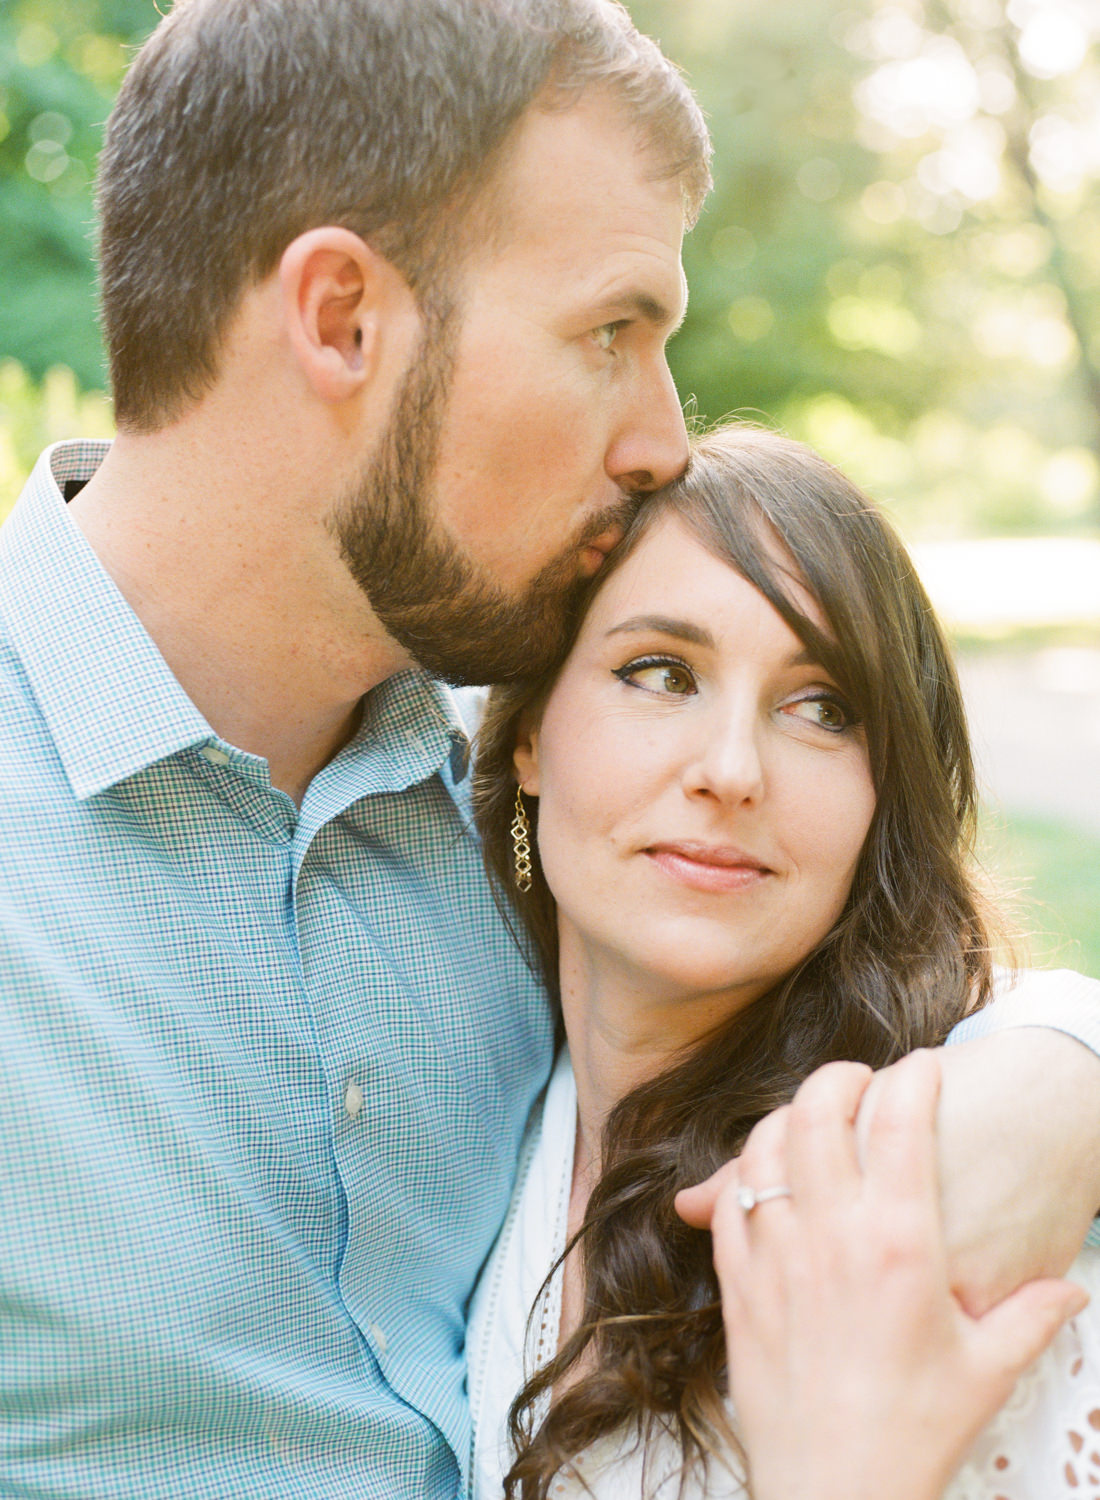 St. Louis engagement photography at Lafayette Park; Erica Robnett Photography